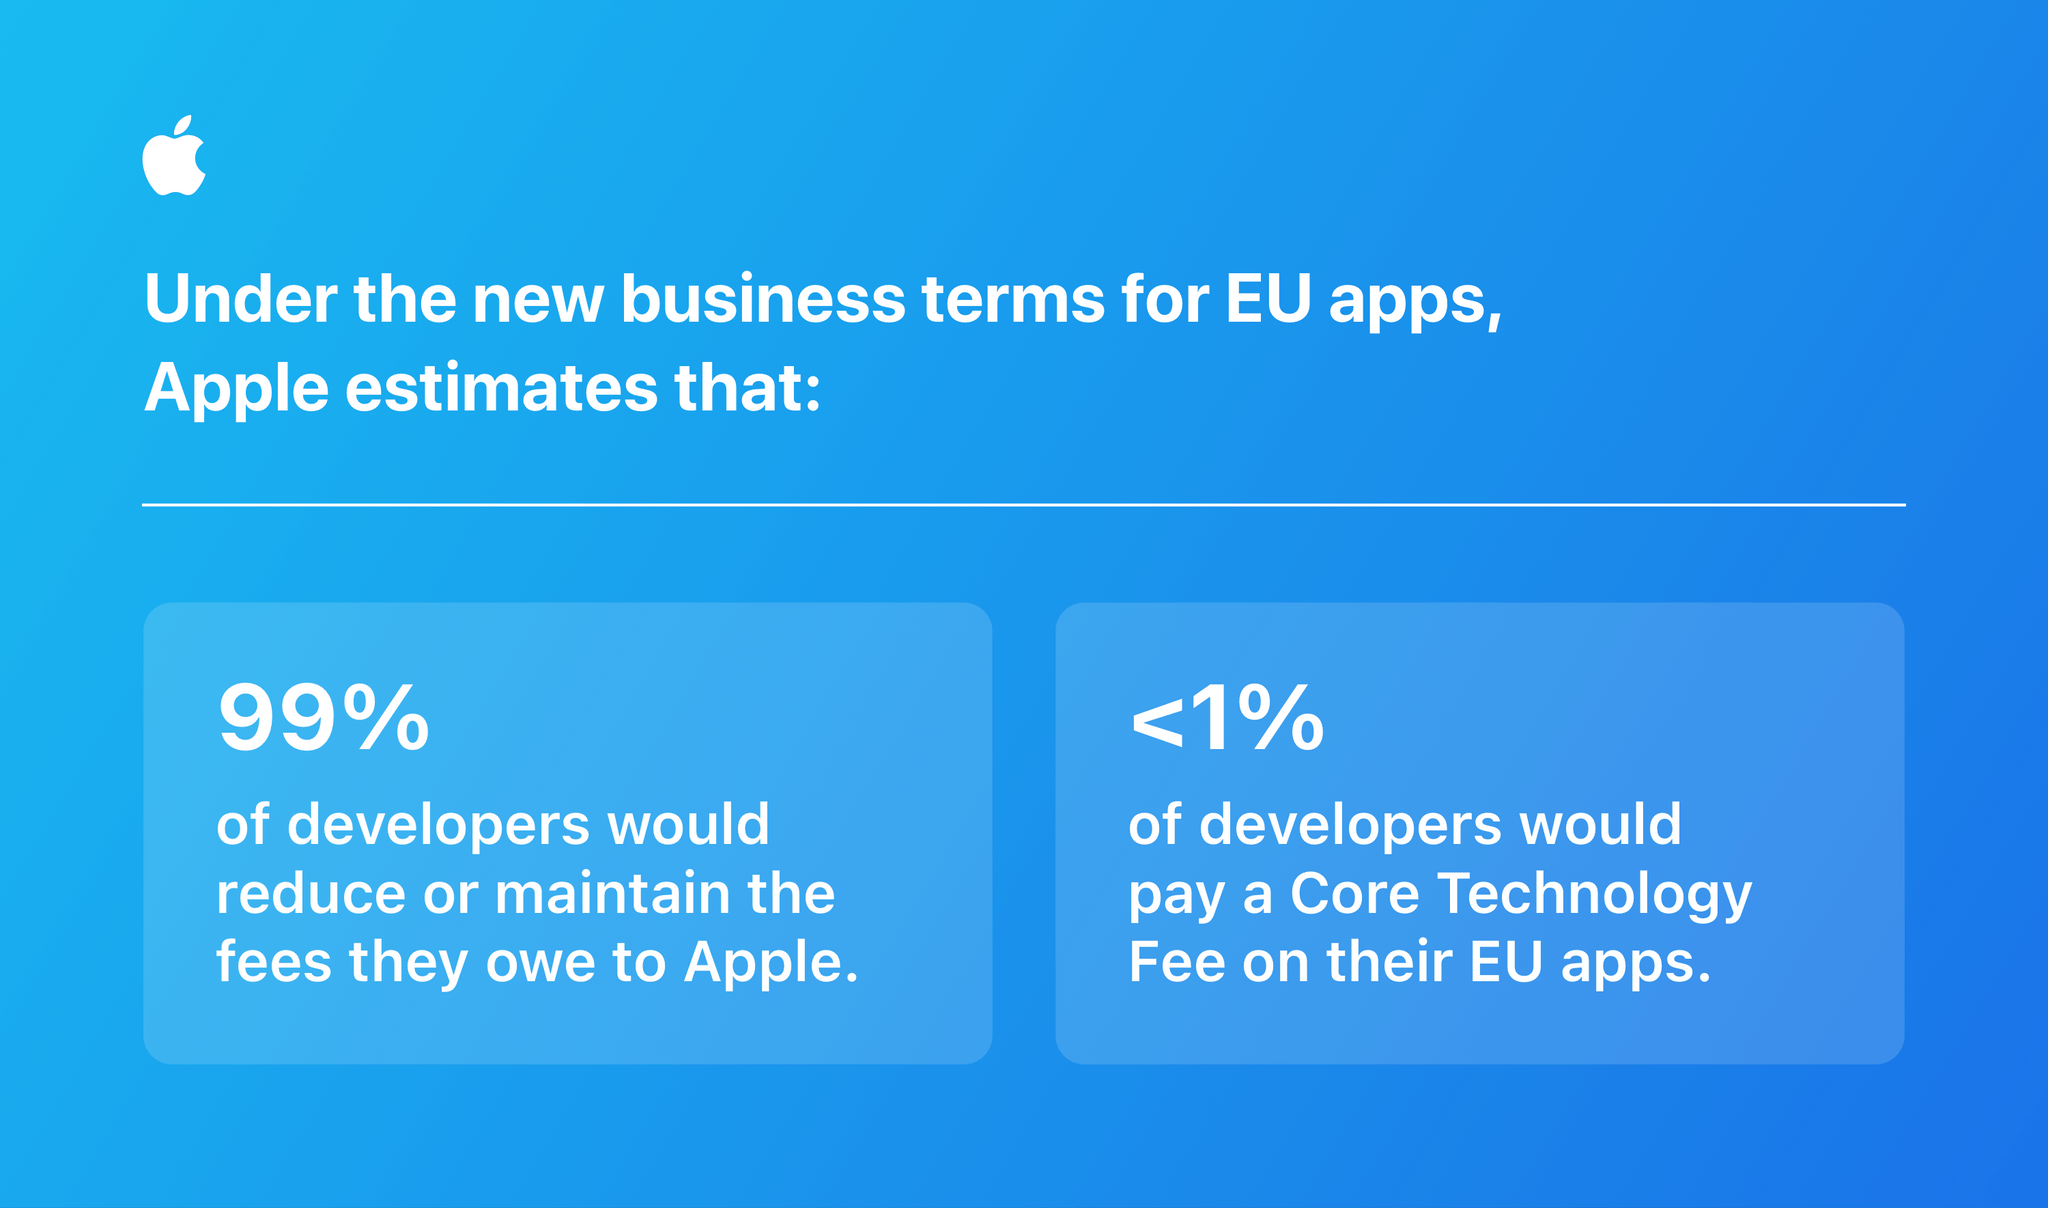 Apple says most developers would be better off adopting their new business terms, but there's more to the calculus than fees alone. Source: Apple.